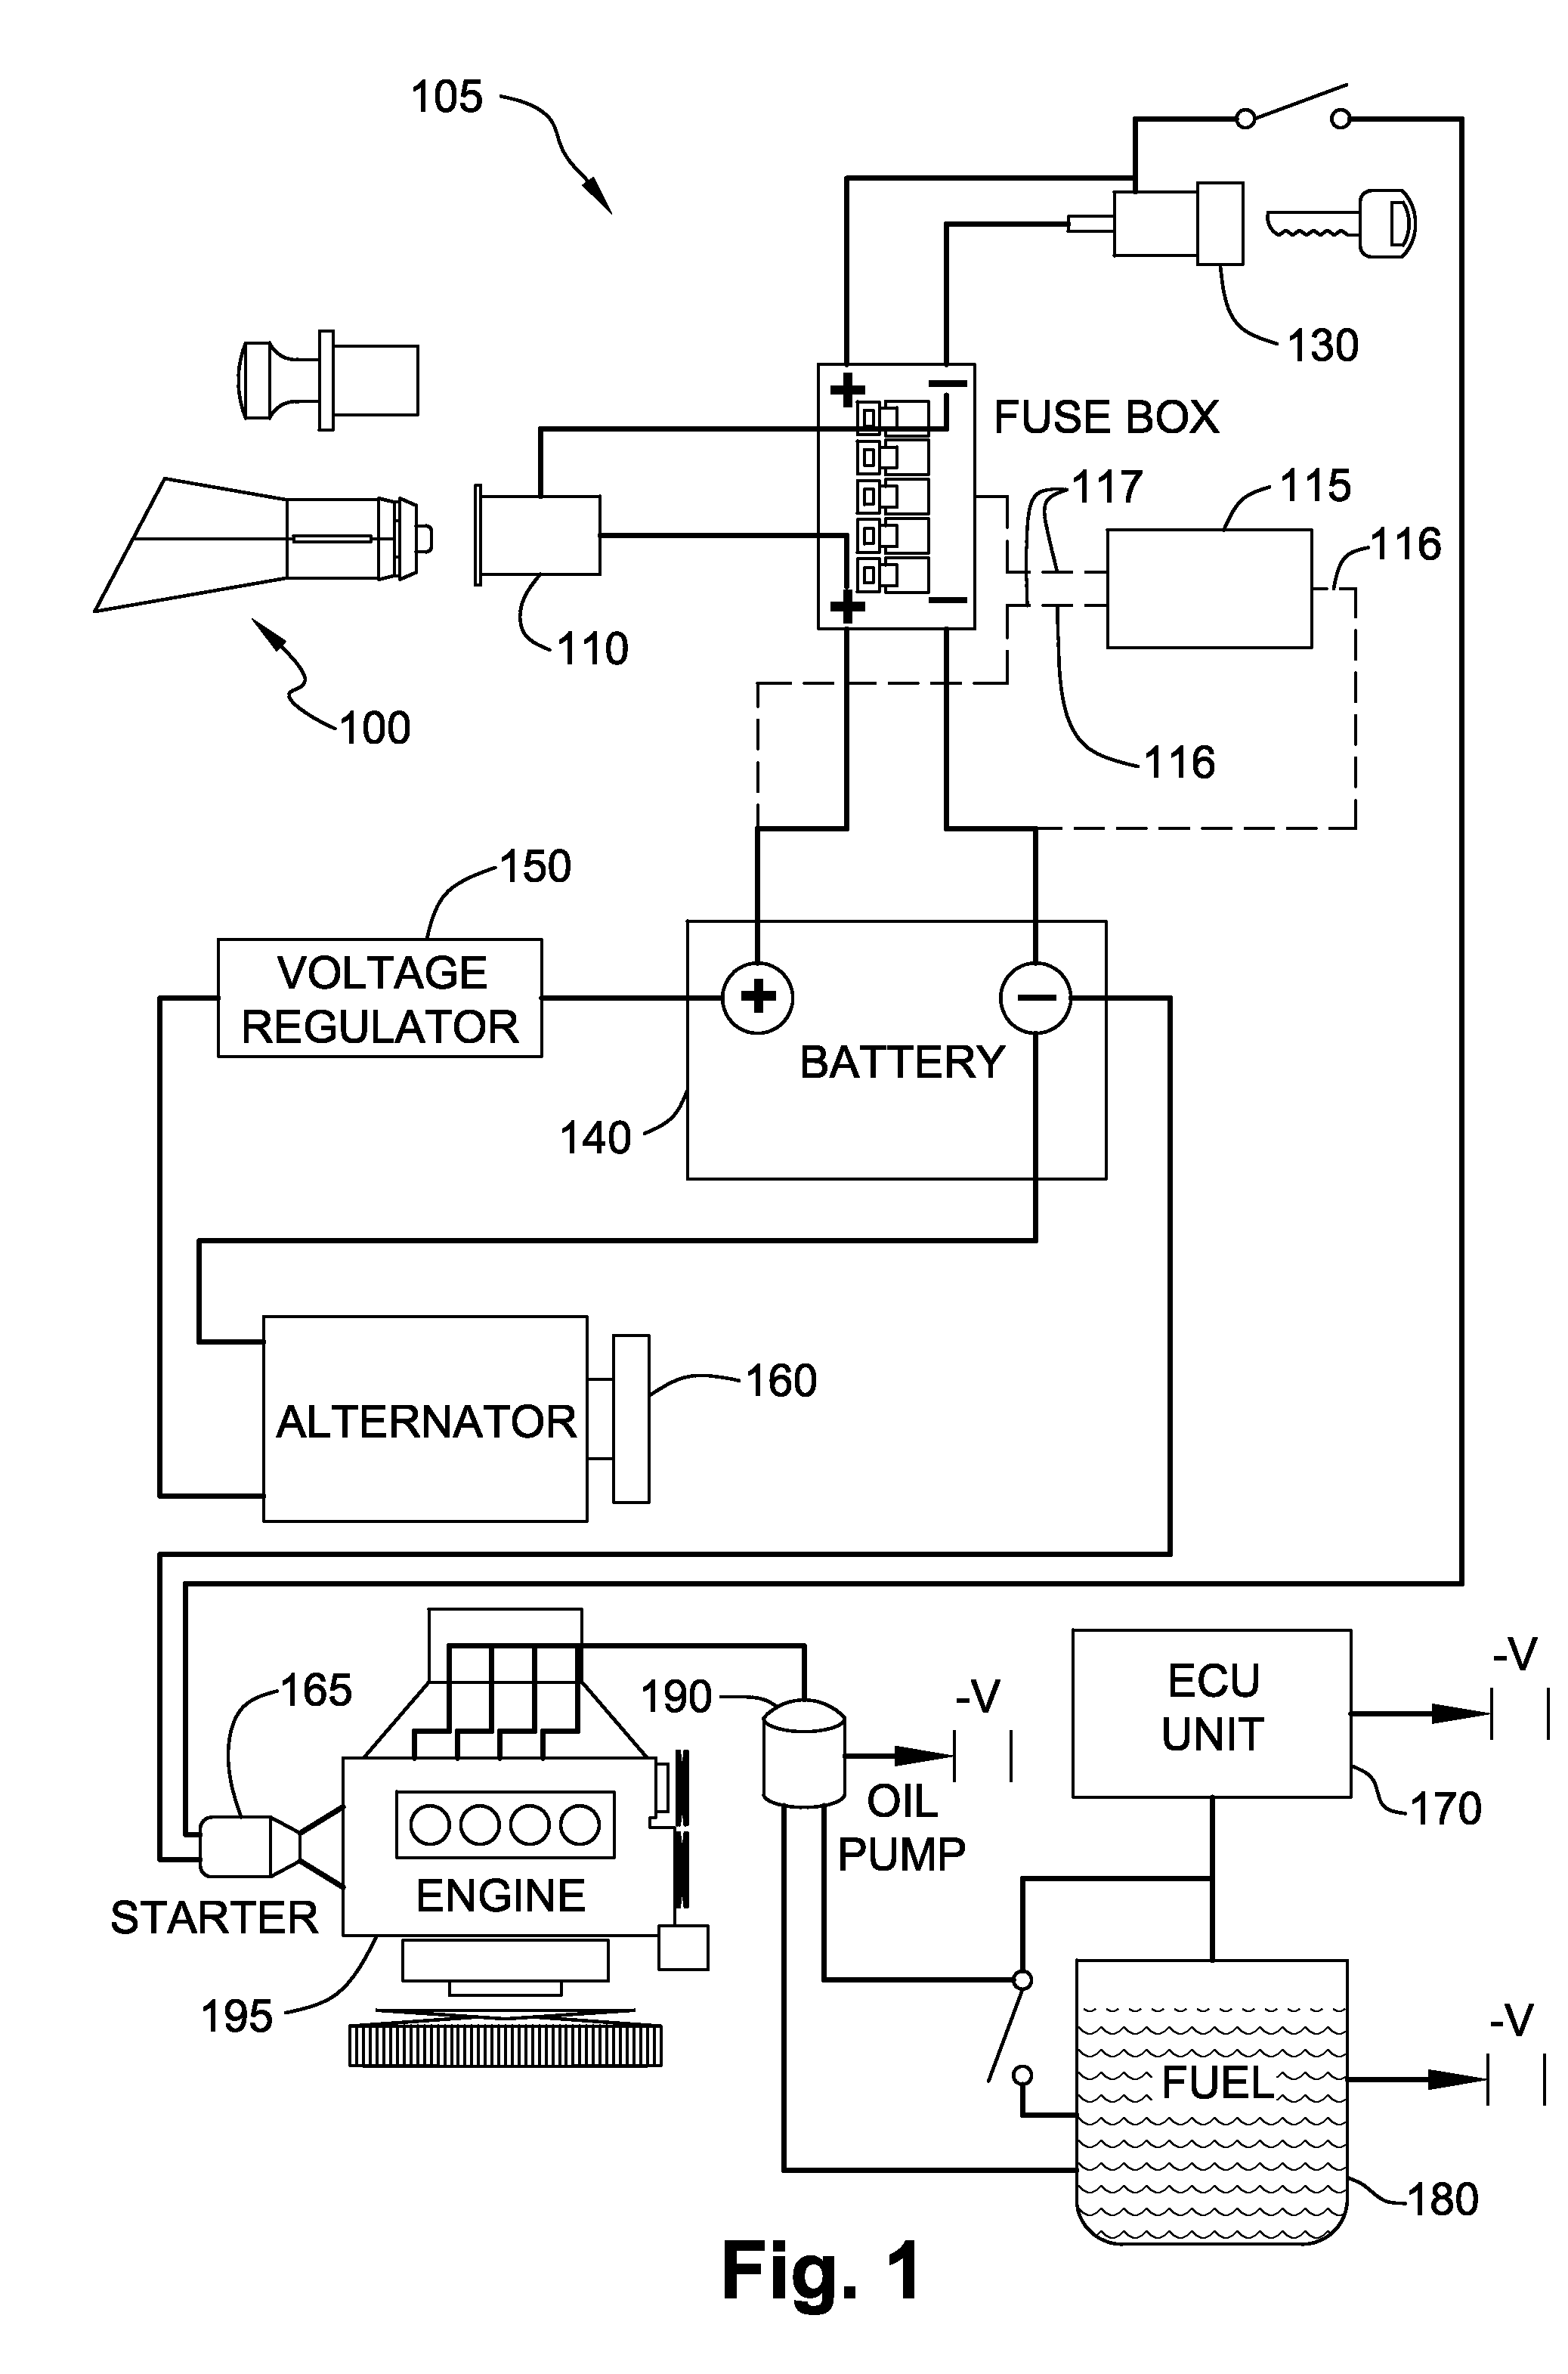 Fuell consumption reduction device